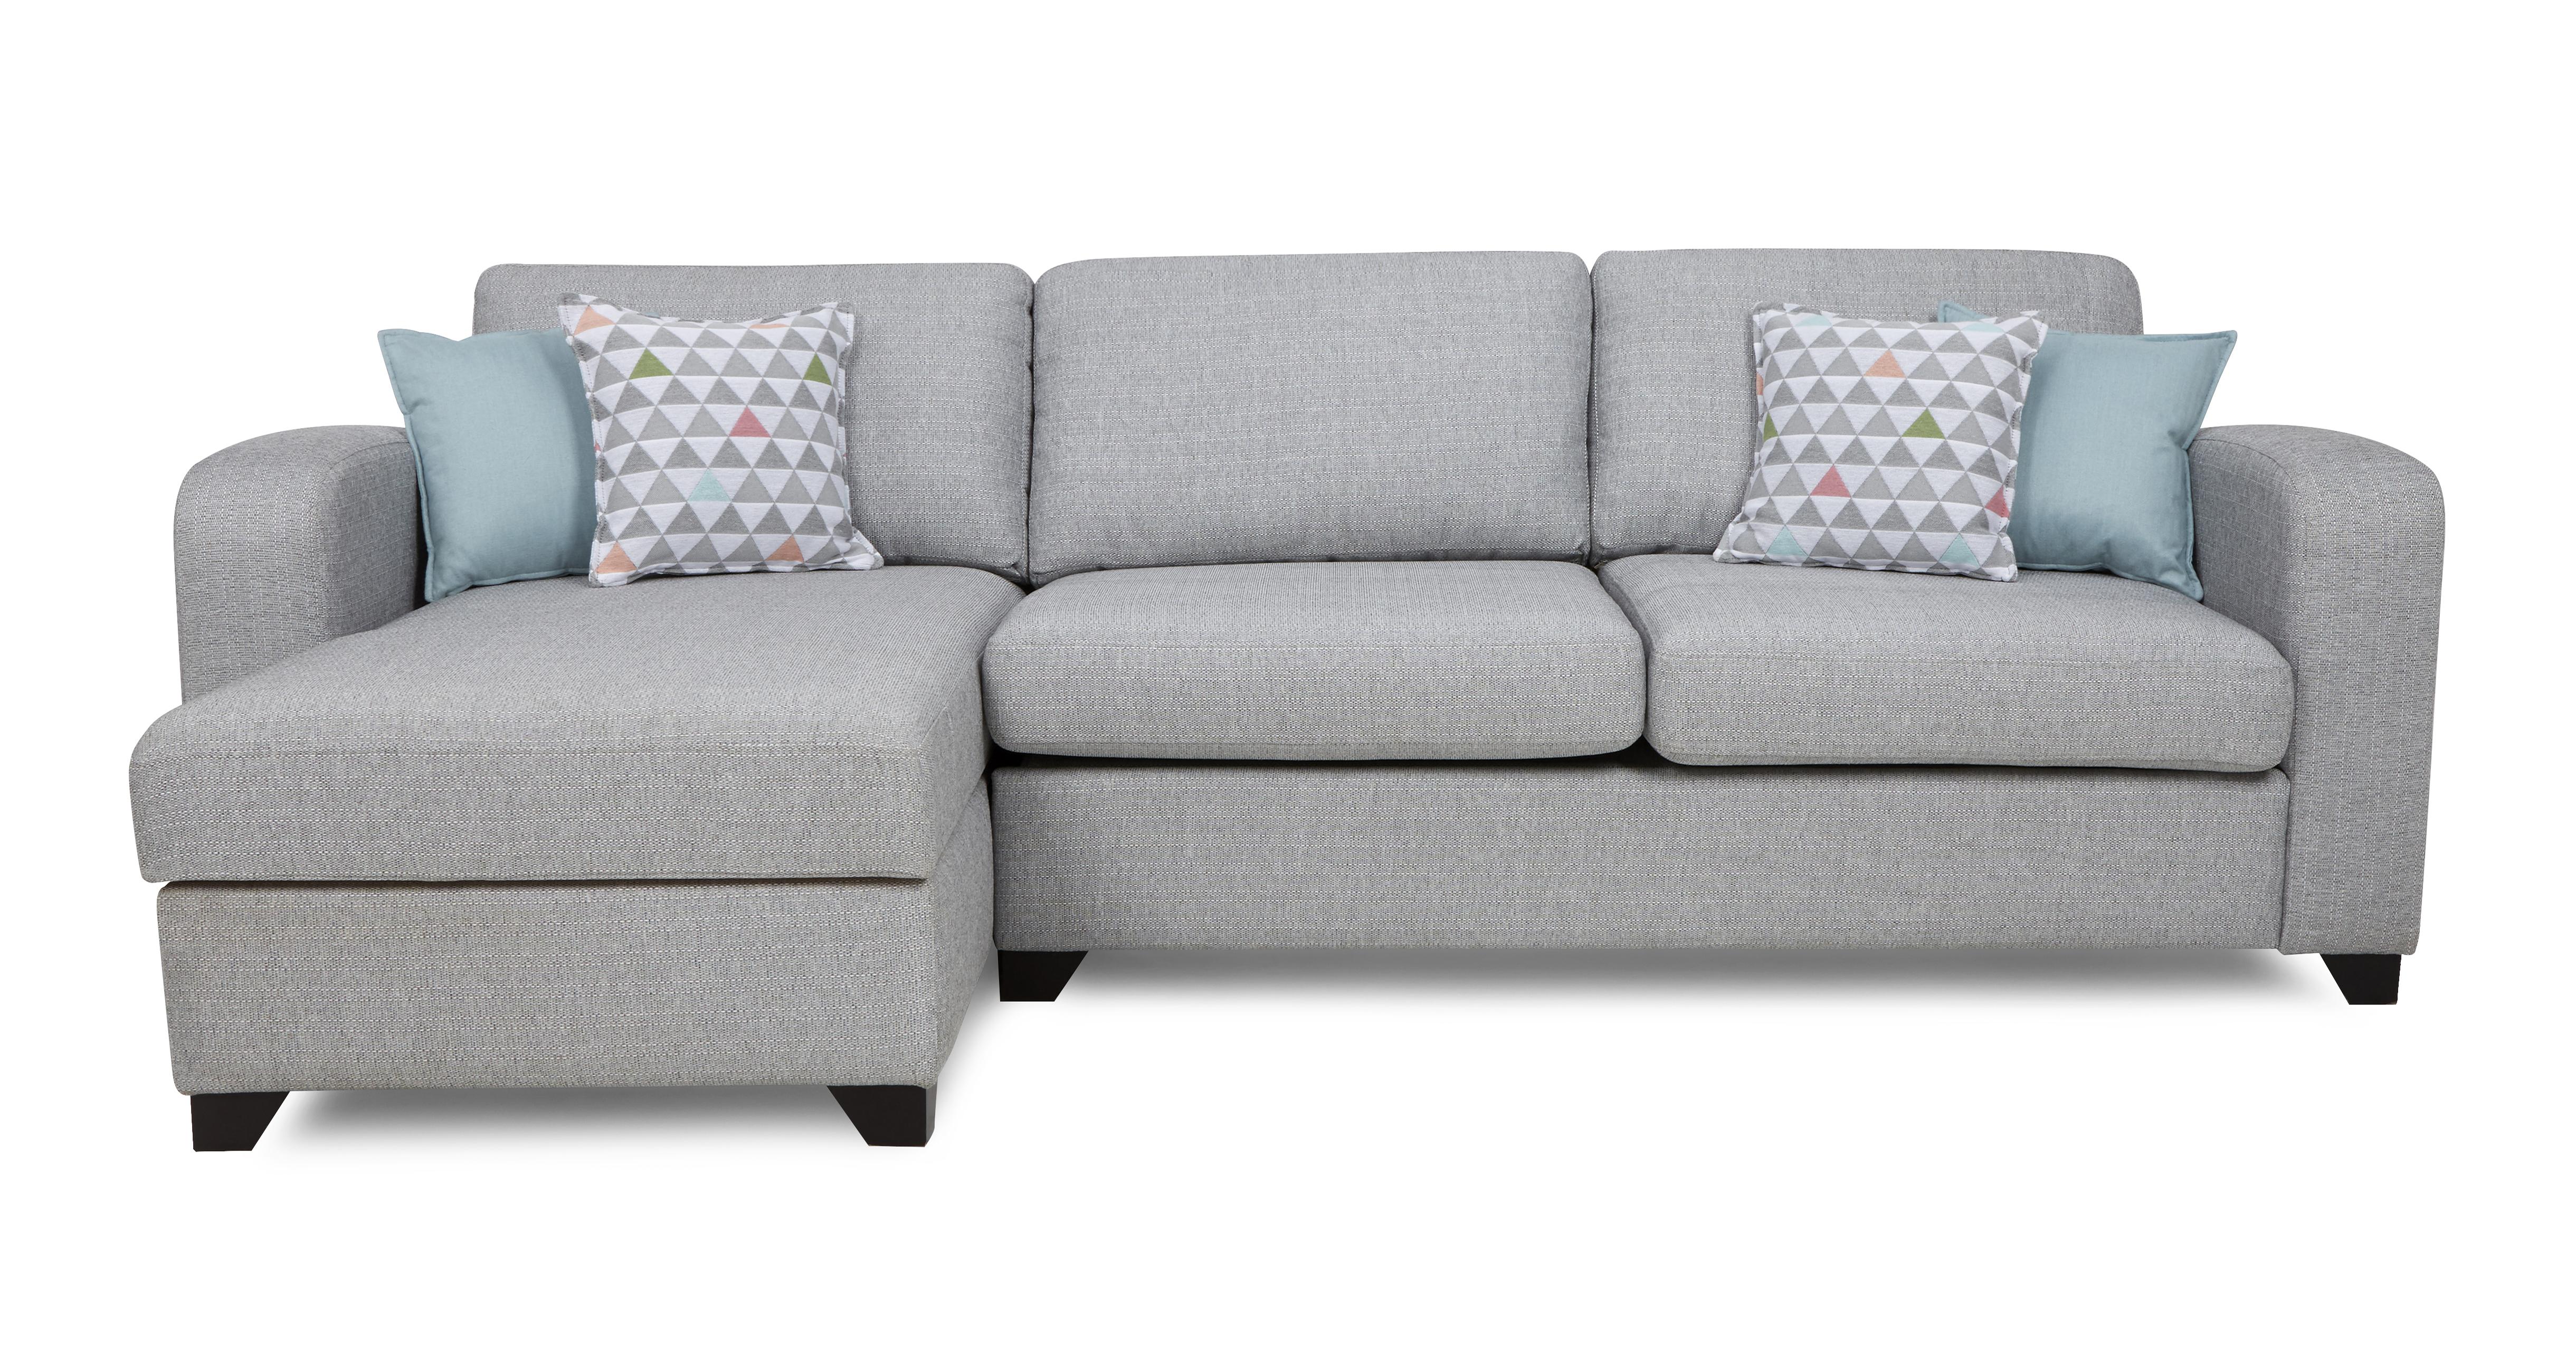 dfs lydia 3 seater sofa bed